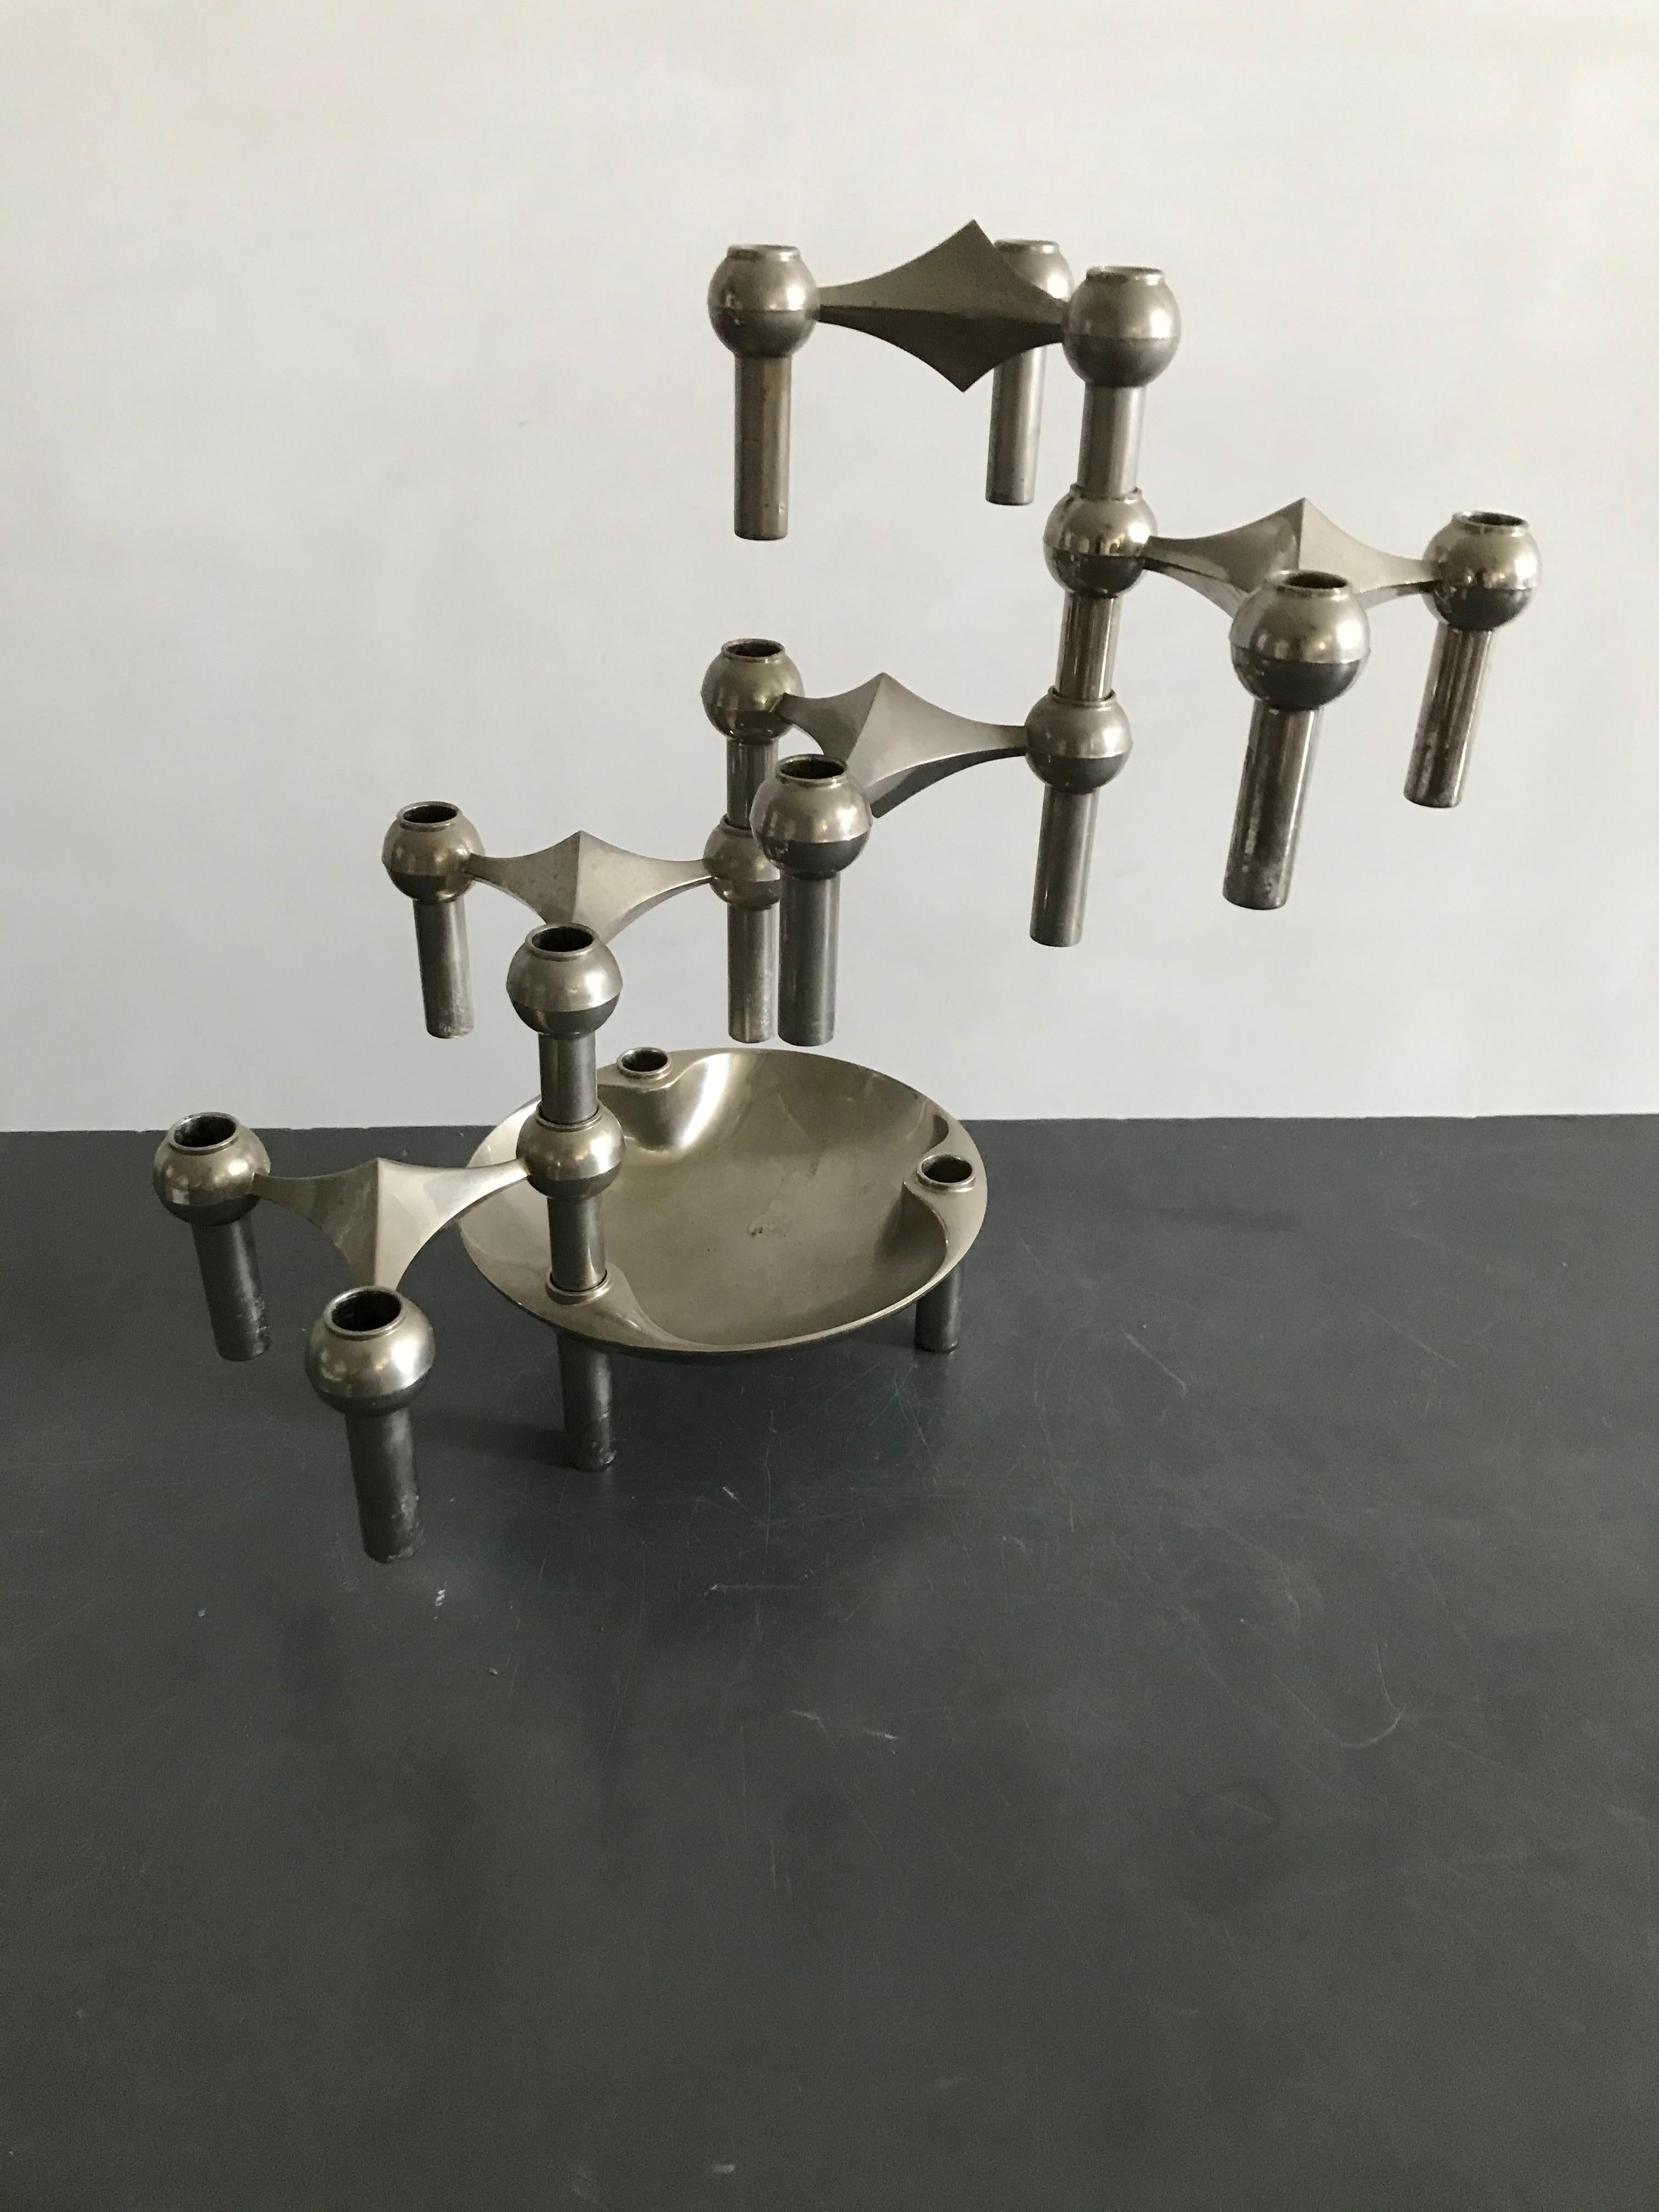 A Classic Nagel candleholder set, with a rare dish. The set holds 5 candle segments and a dish. It can be configured in various number of ways, as well vertically as horizontally by stacking the interlocking pieces. 

   